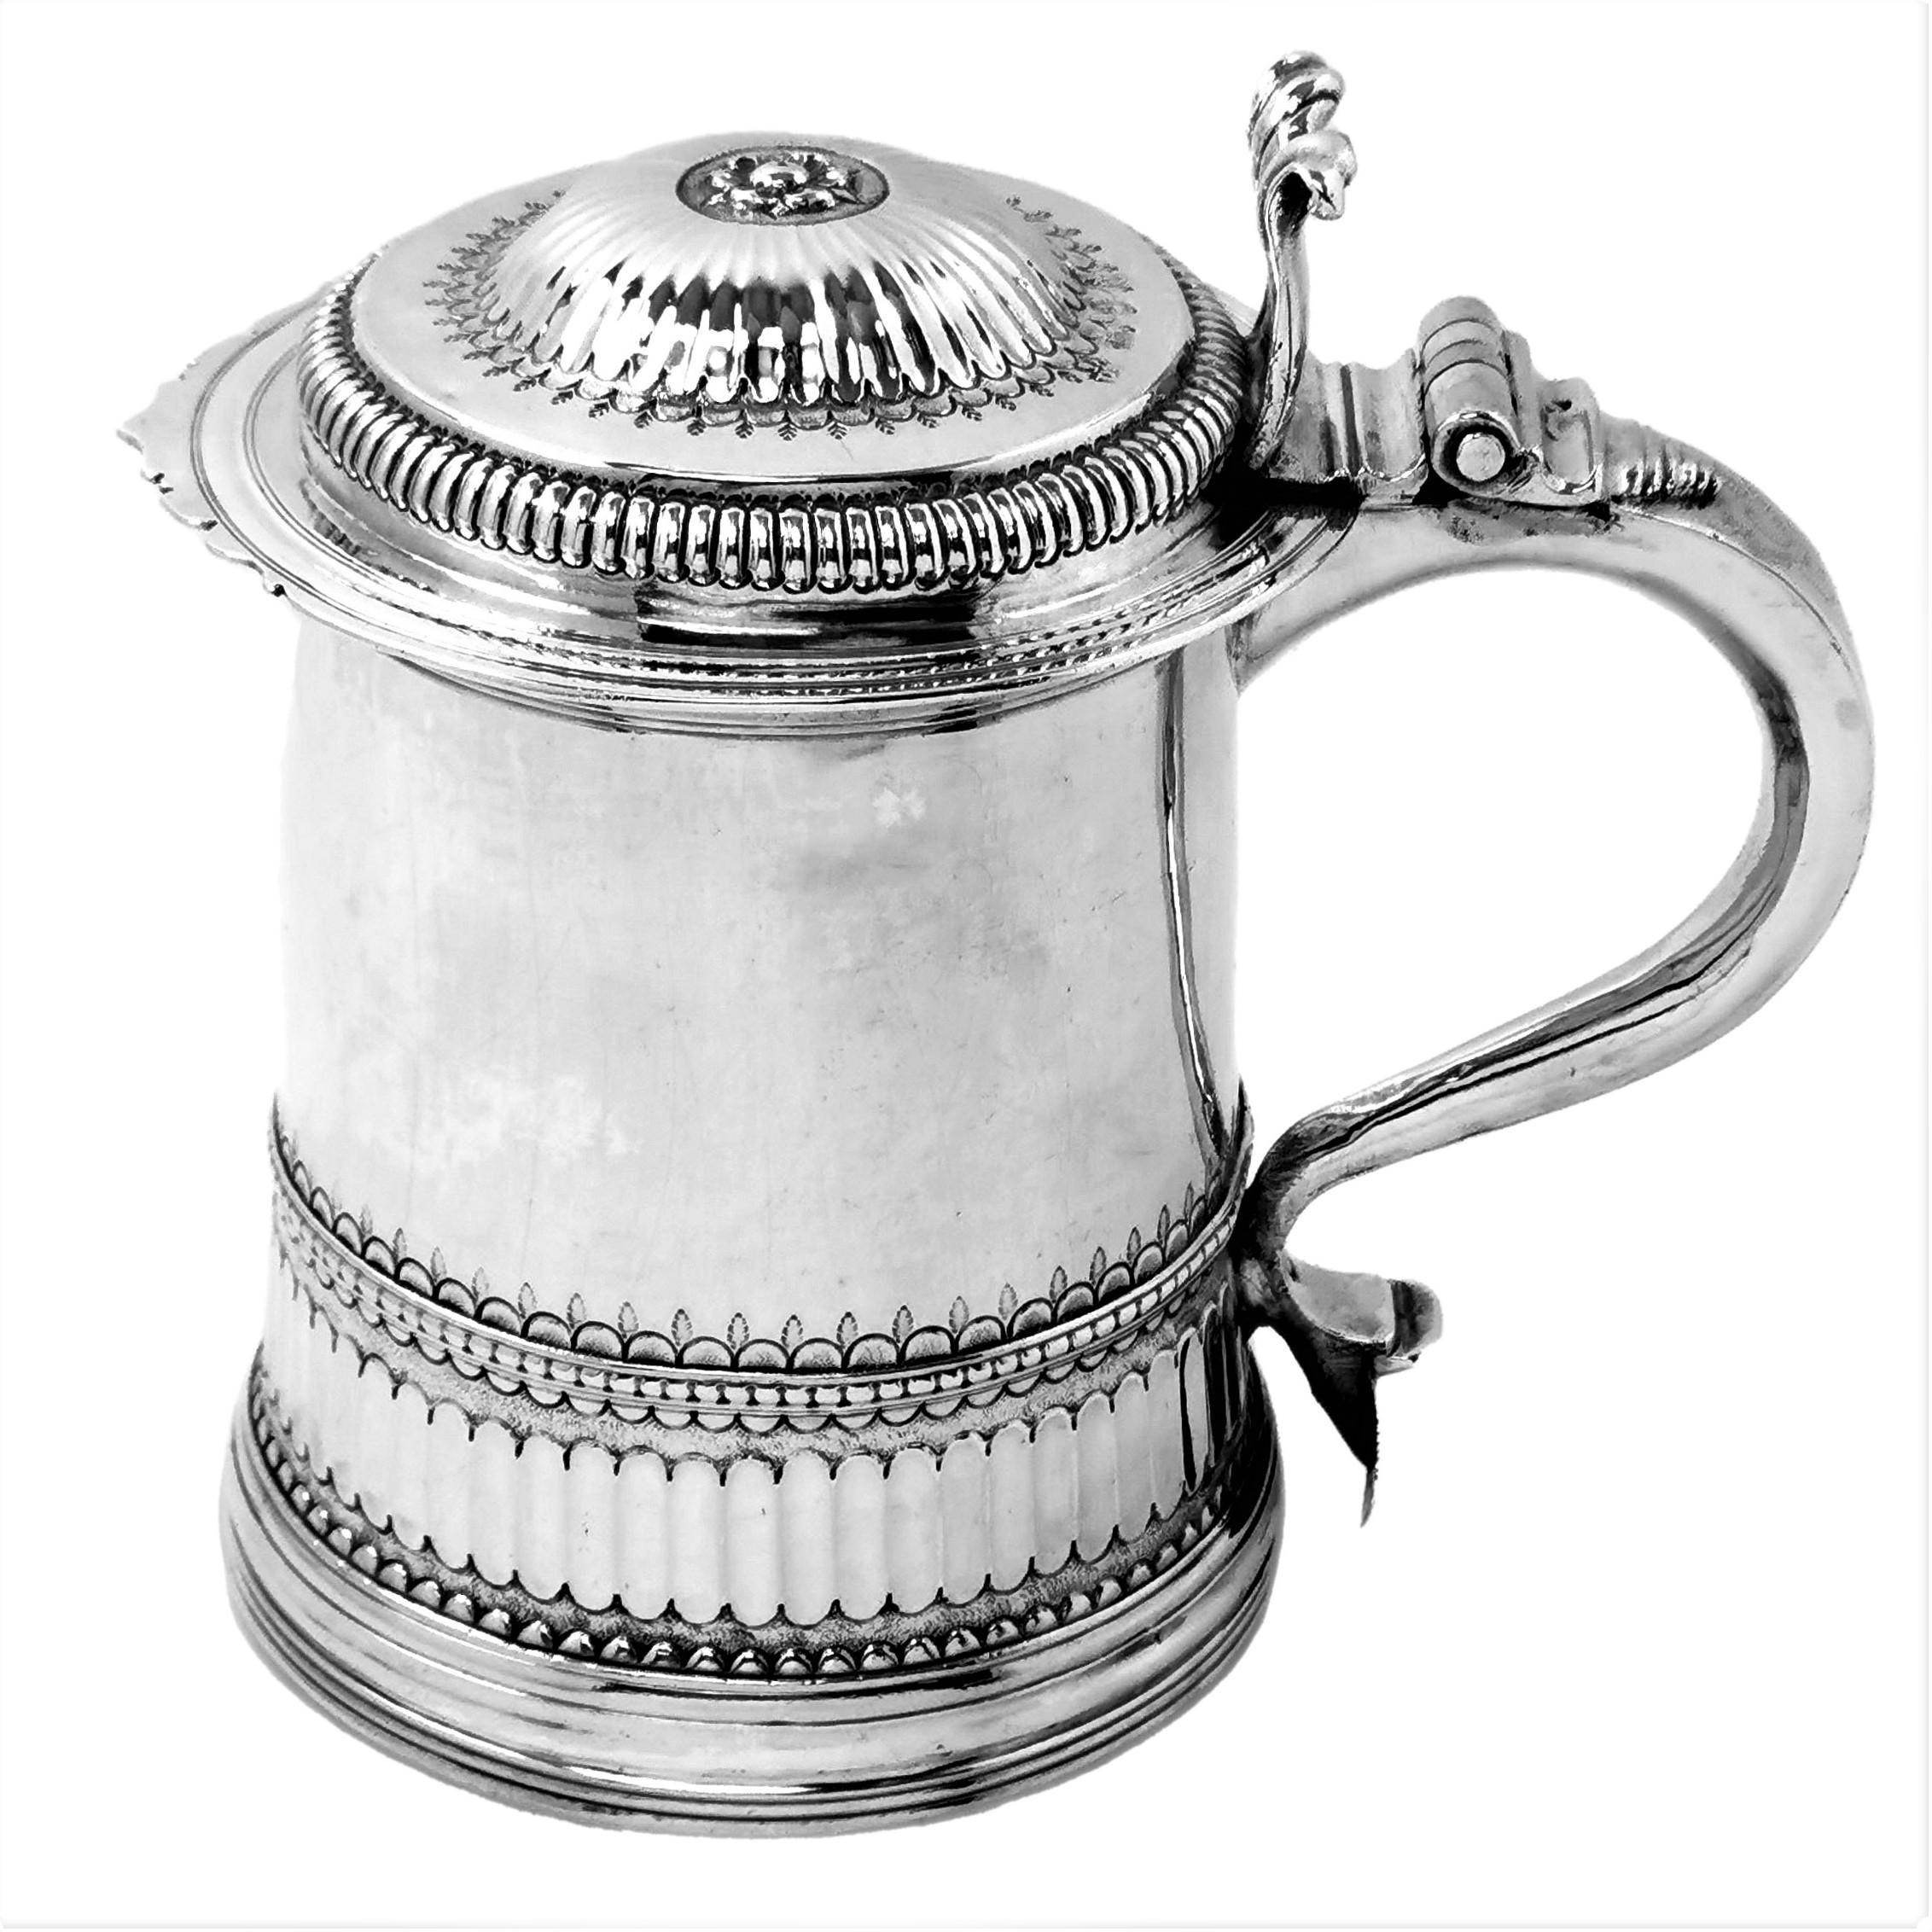 English Antique Queen Anne Sterling Silver Lidded Tankard Beer Mug 1704, 18th Century